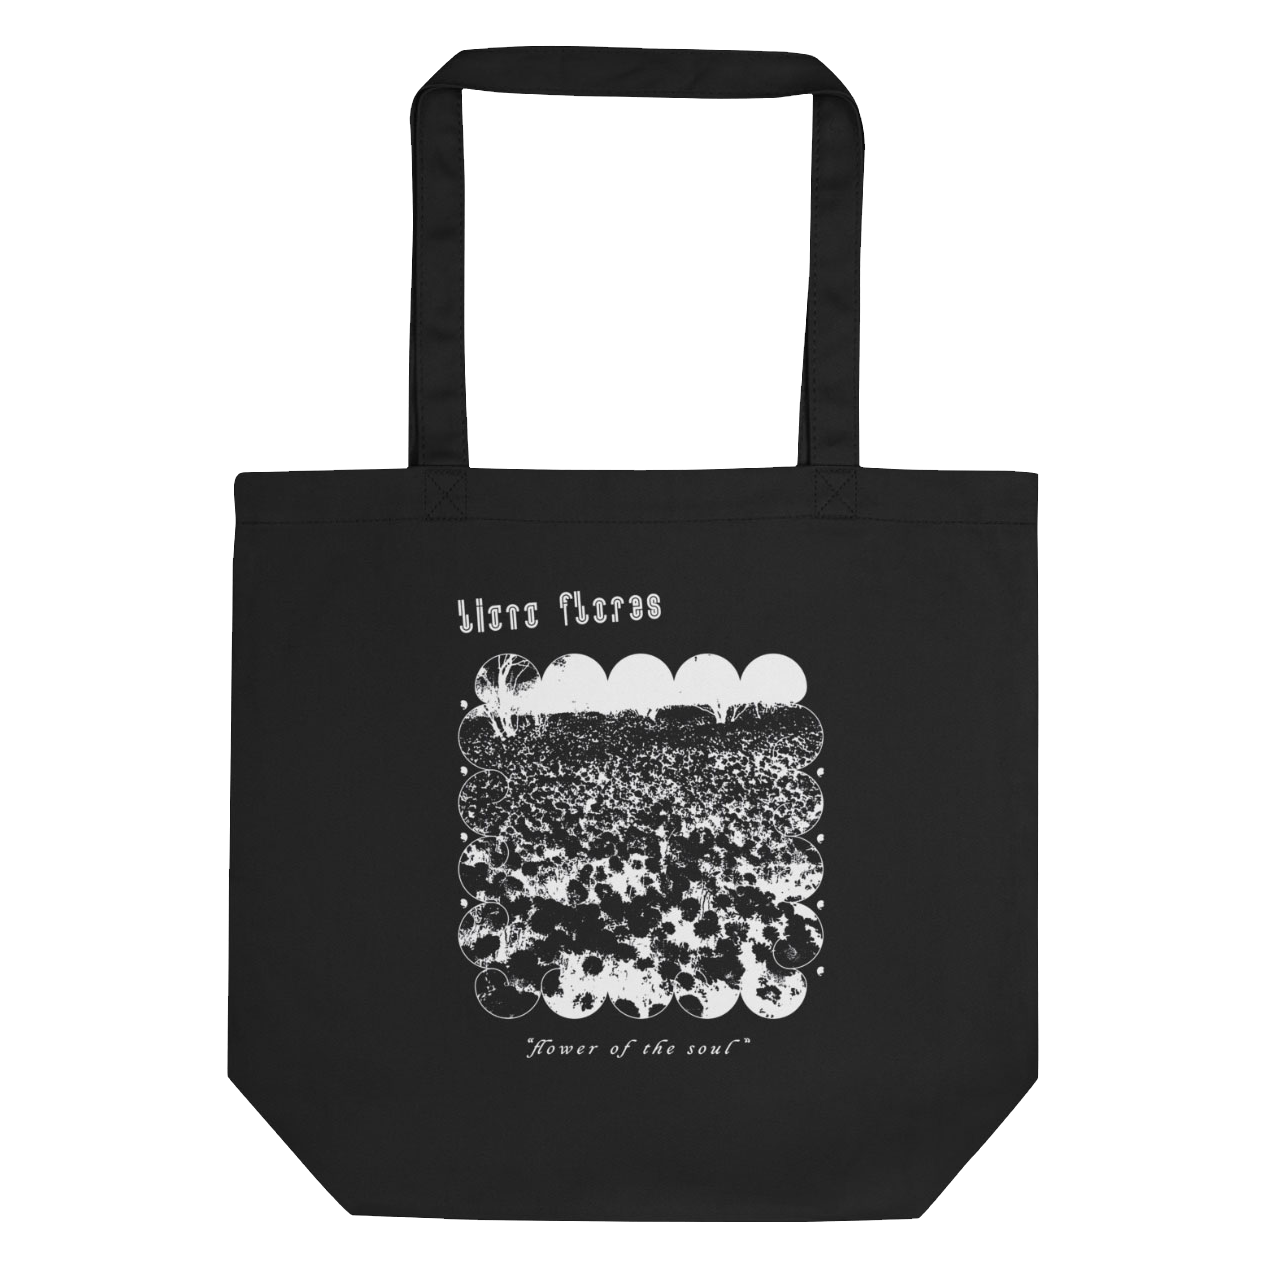 Liana Flores - Flower of the soul tote: black